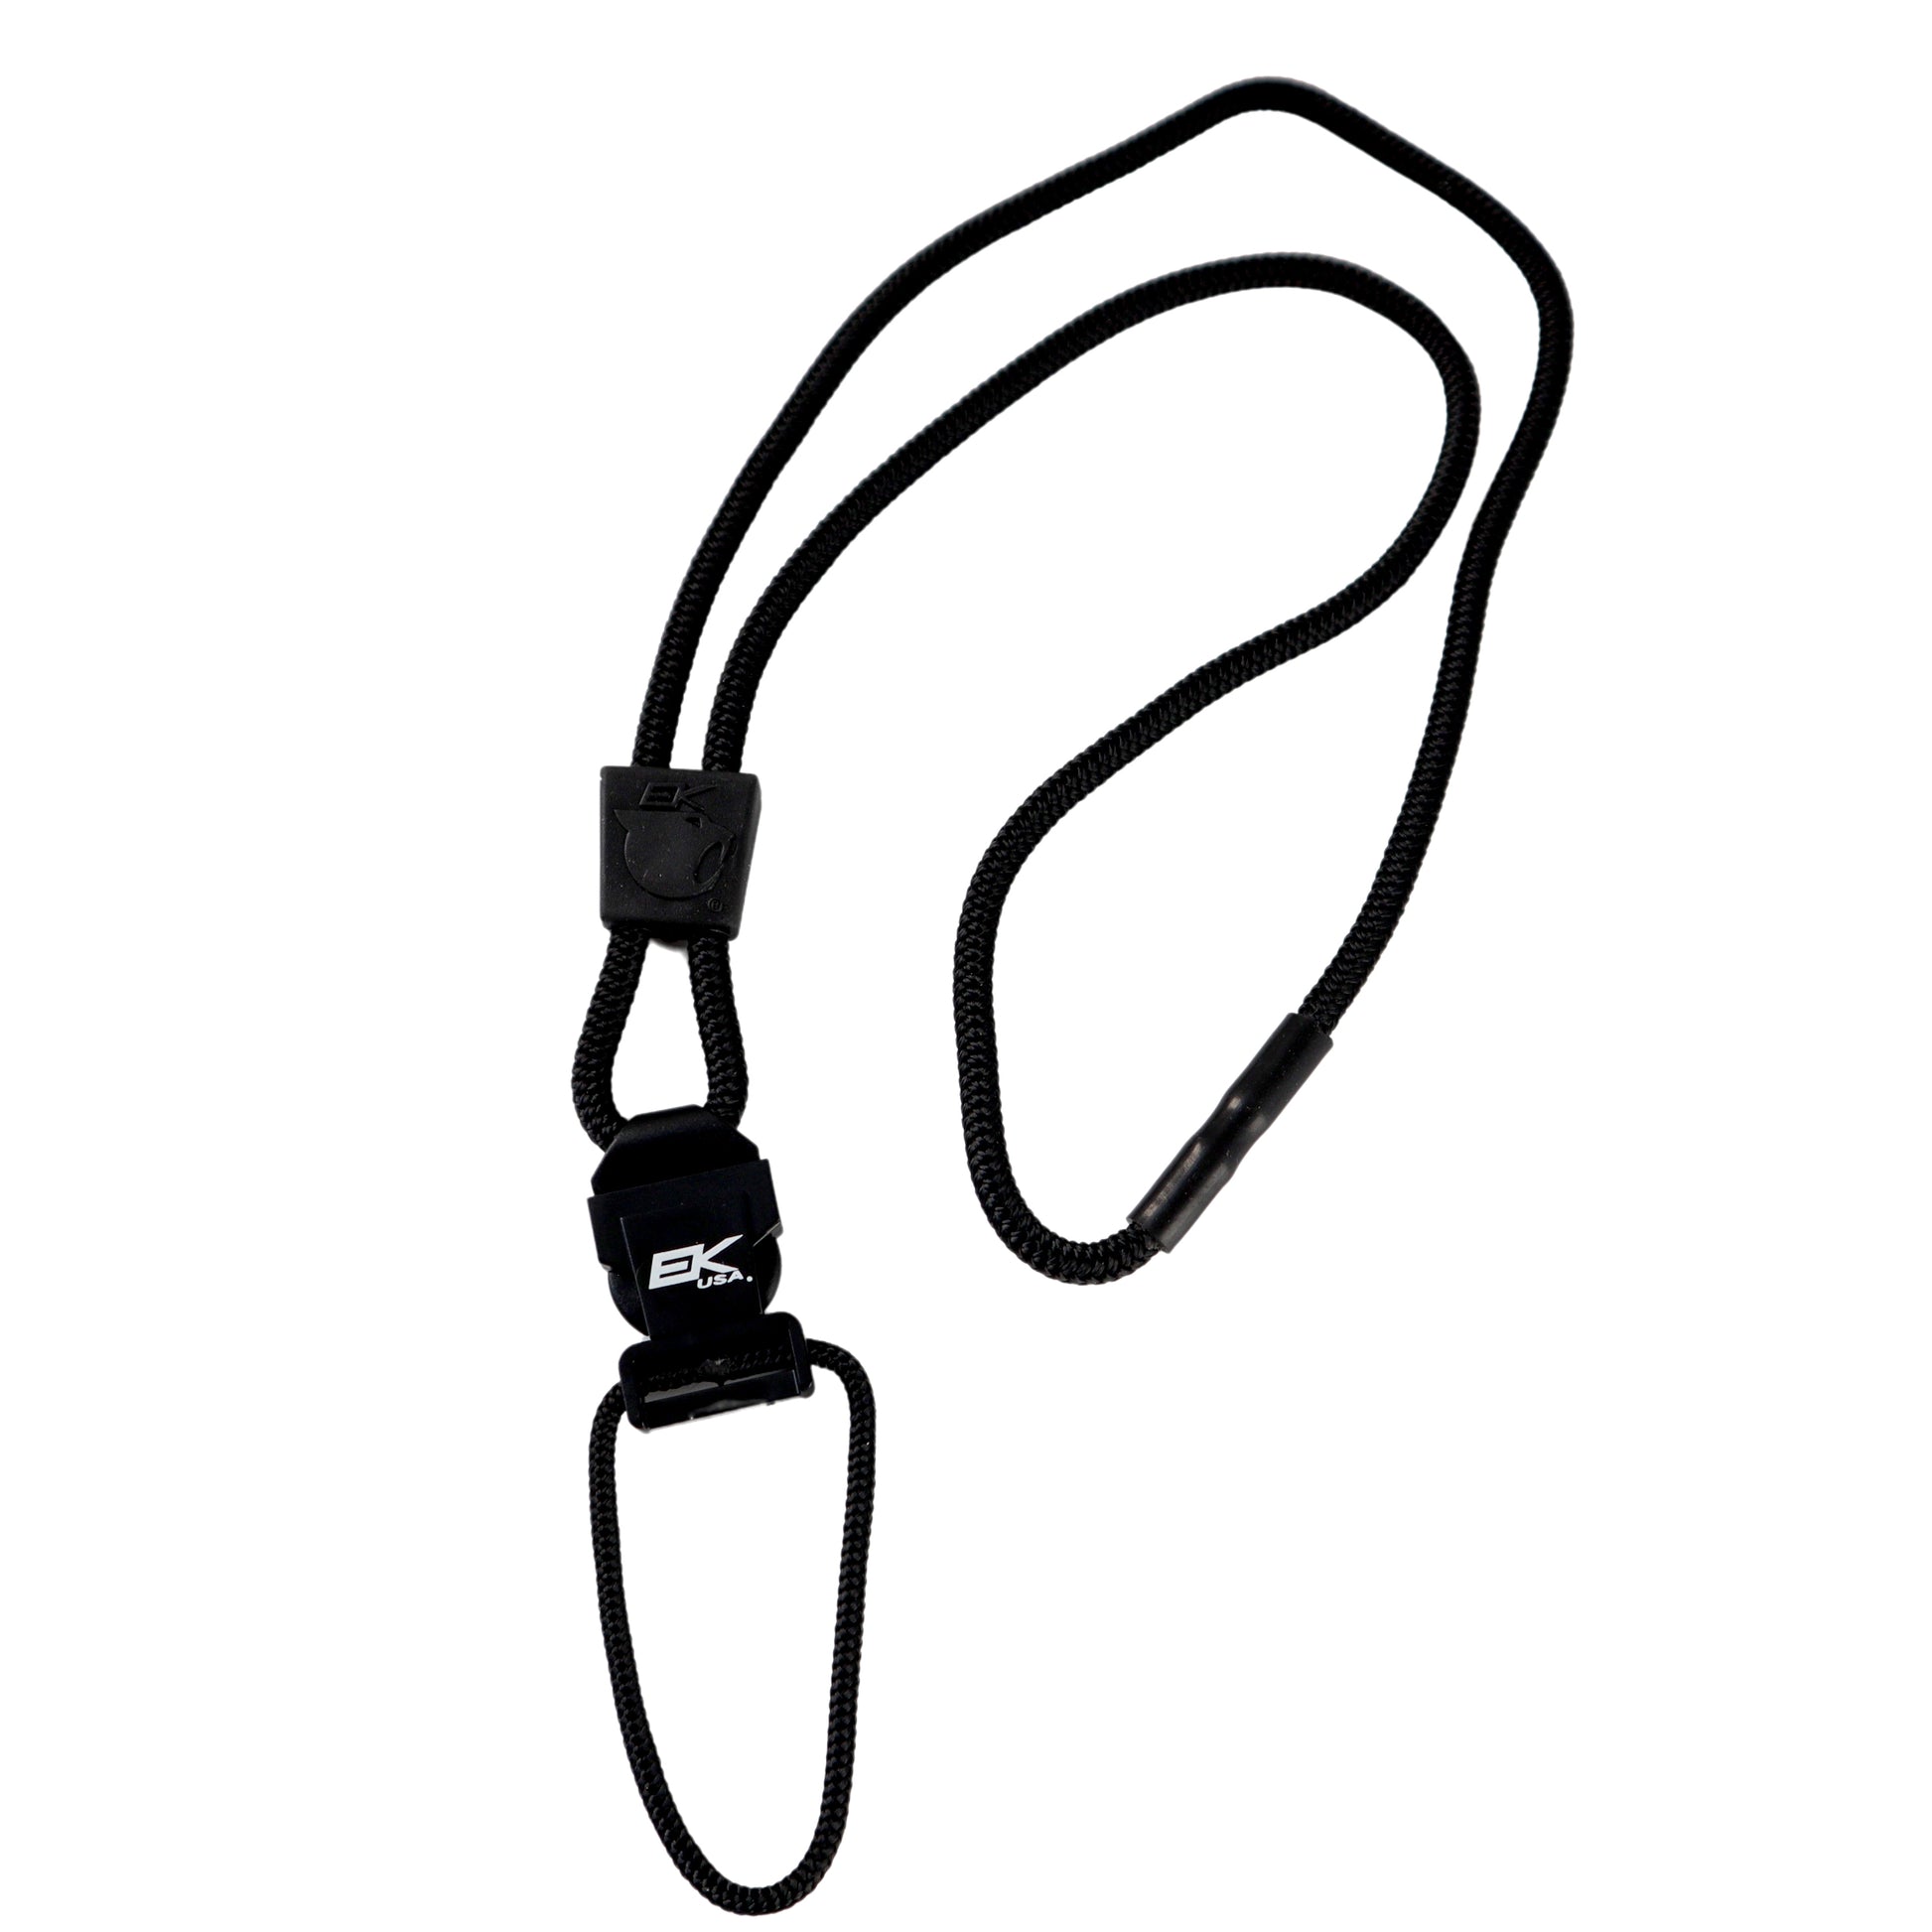 The EK Lanyard Plus with Detachable Soft End (10252) by EK USA is a black, non-metallic lanyard featuring a detachable buckle and a loop at one end, perfect for professional field identification.